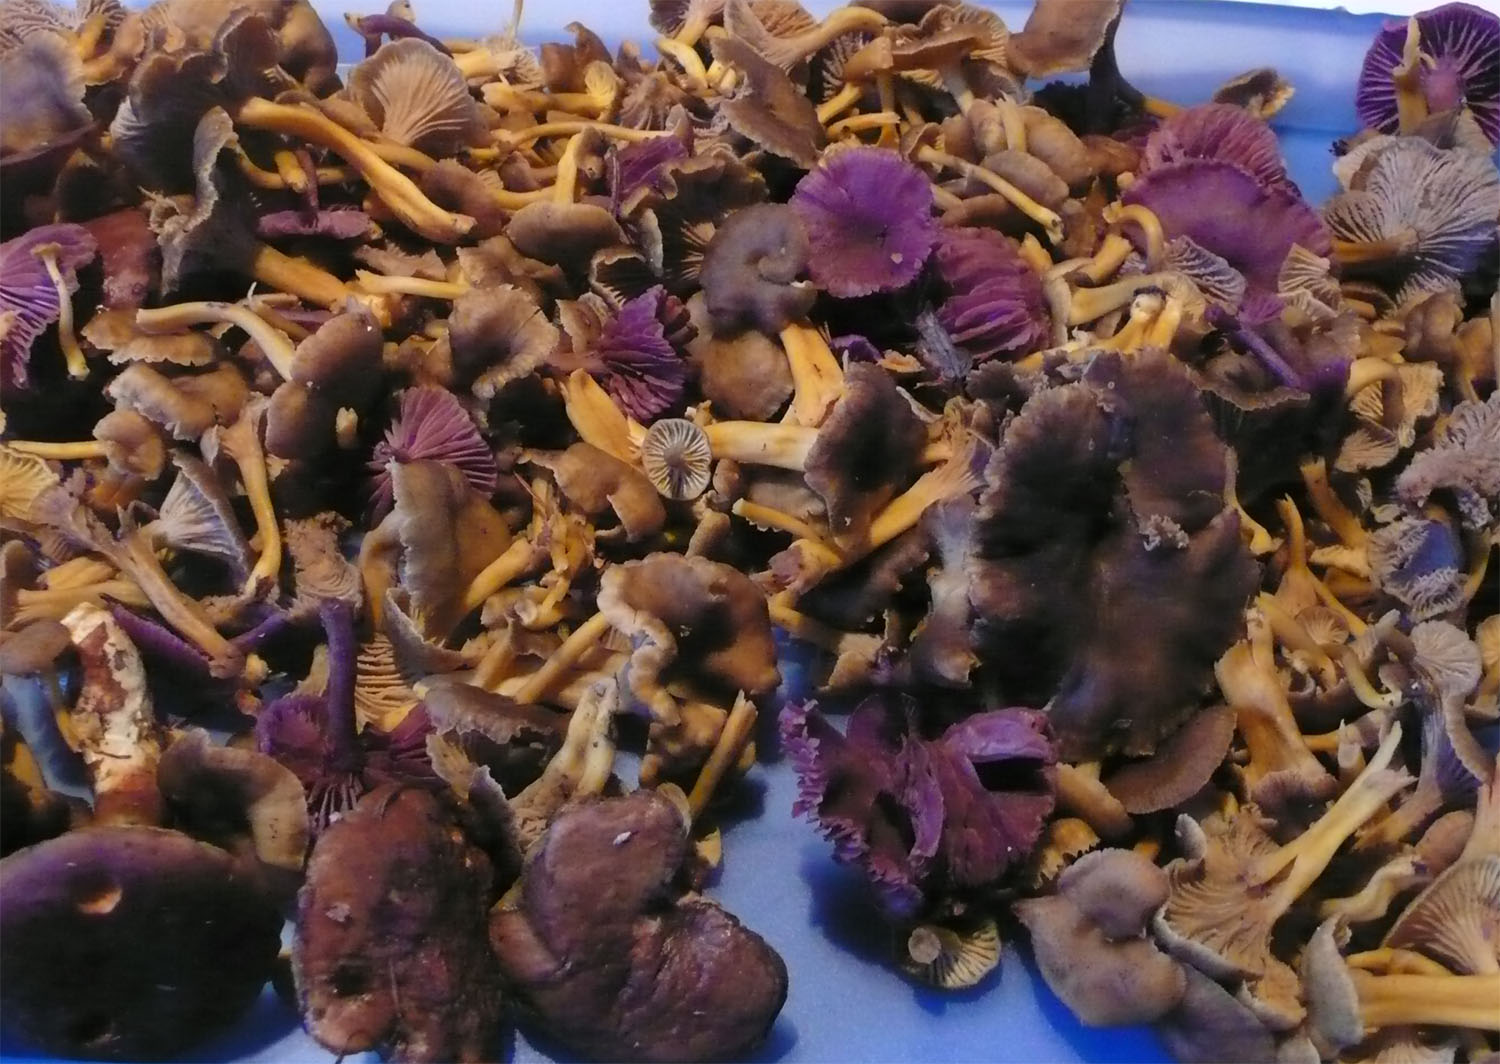 Chanterelles and amethysts found in the State forest